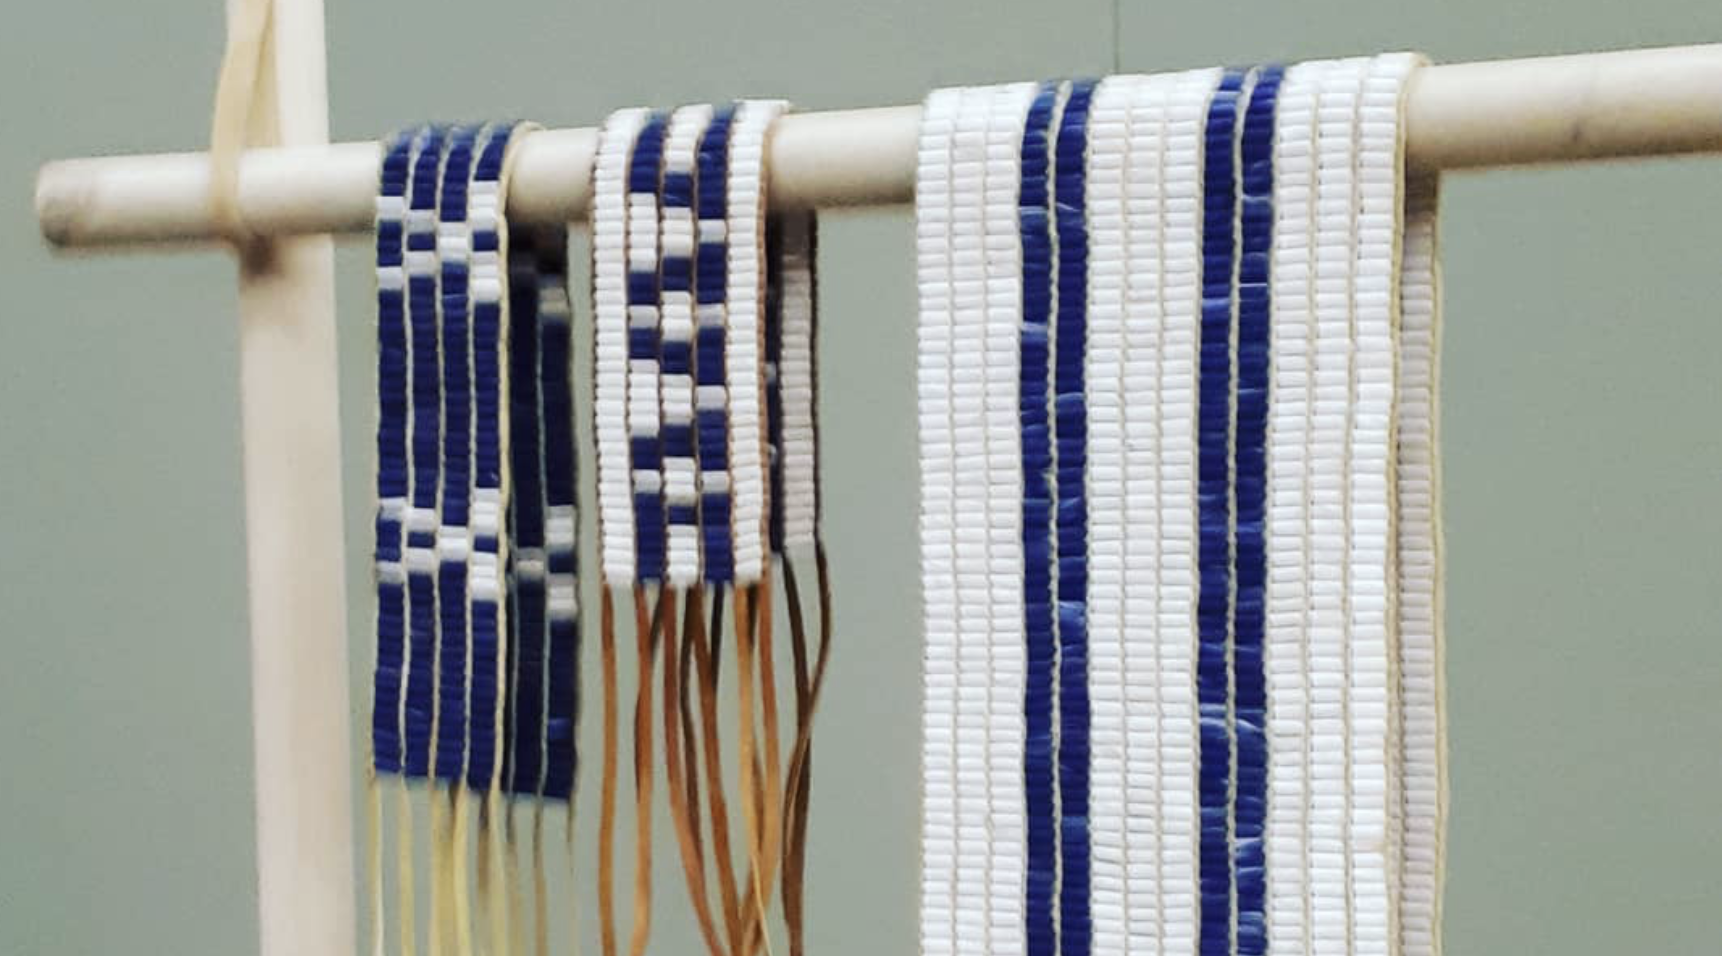 Traditionally crafted wampum belts presented by a member of the Chippewas of Georgina Island, photographed in 2018 at a display in Sutton, Ontario.